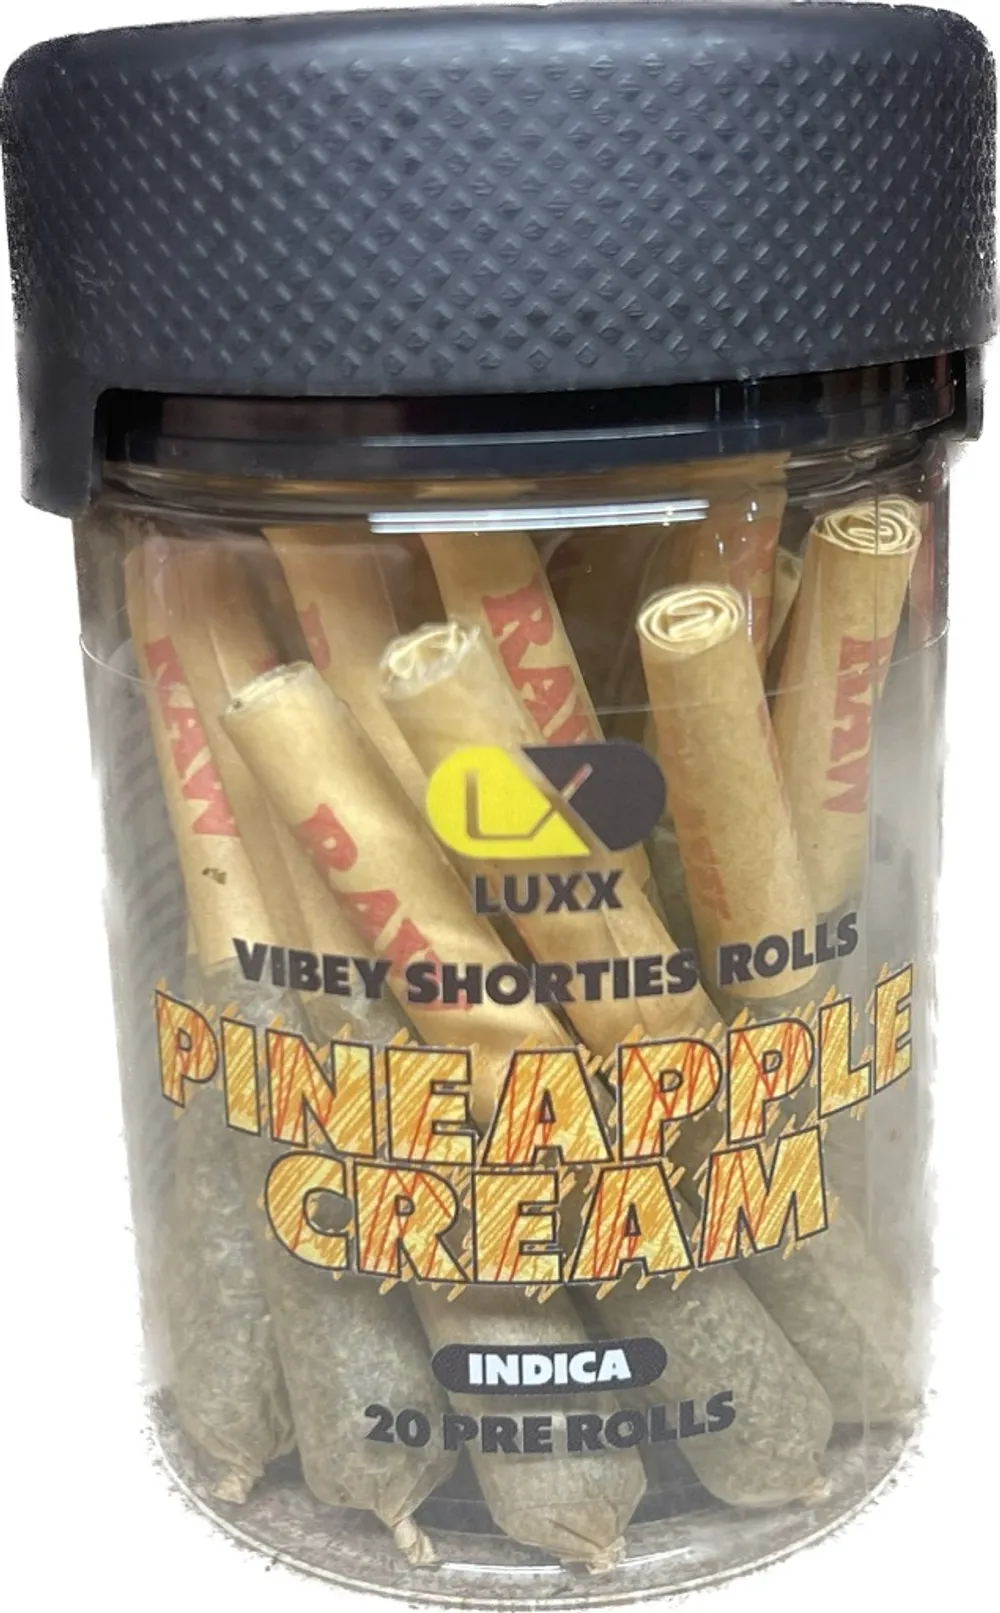 Product image 1 of 1 for Luxx Vibey Shorties Rolls Pineapple Cream 20ct